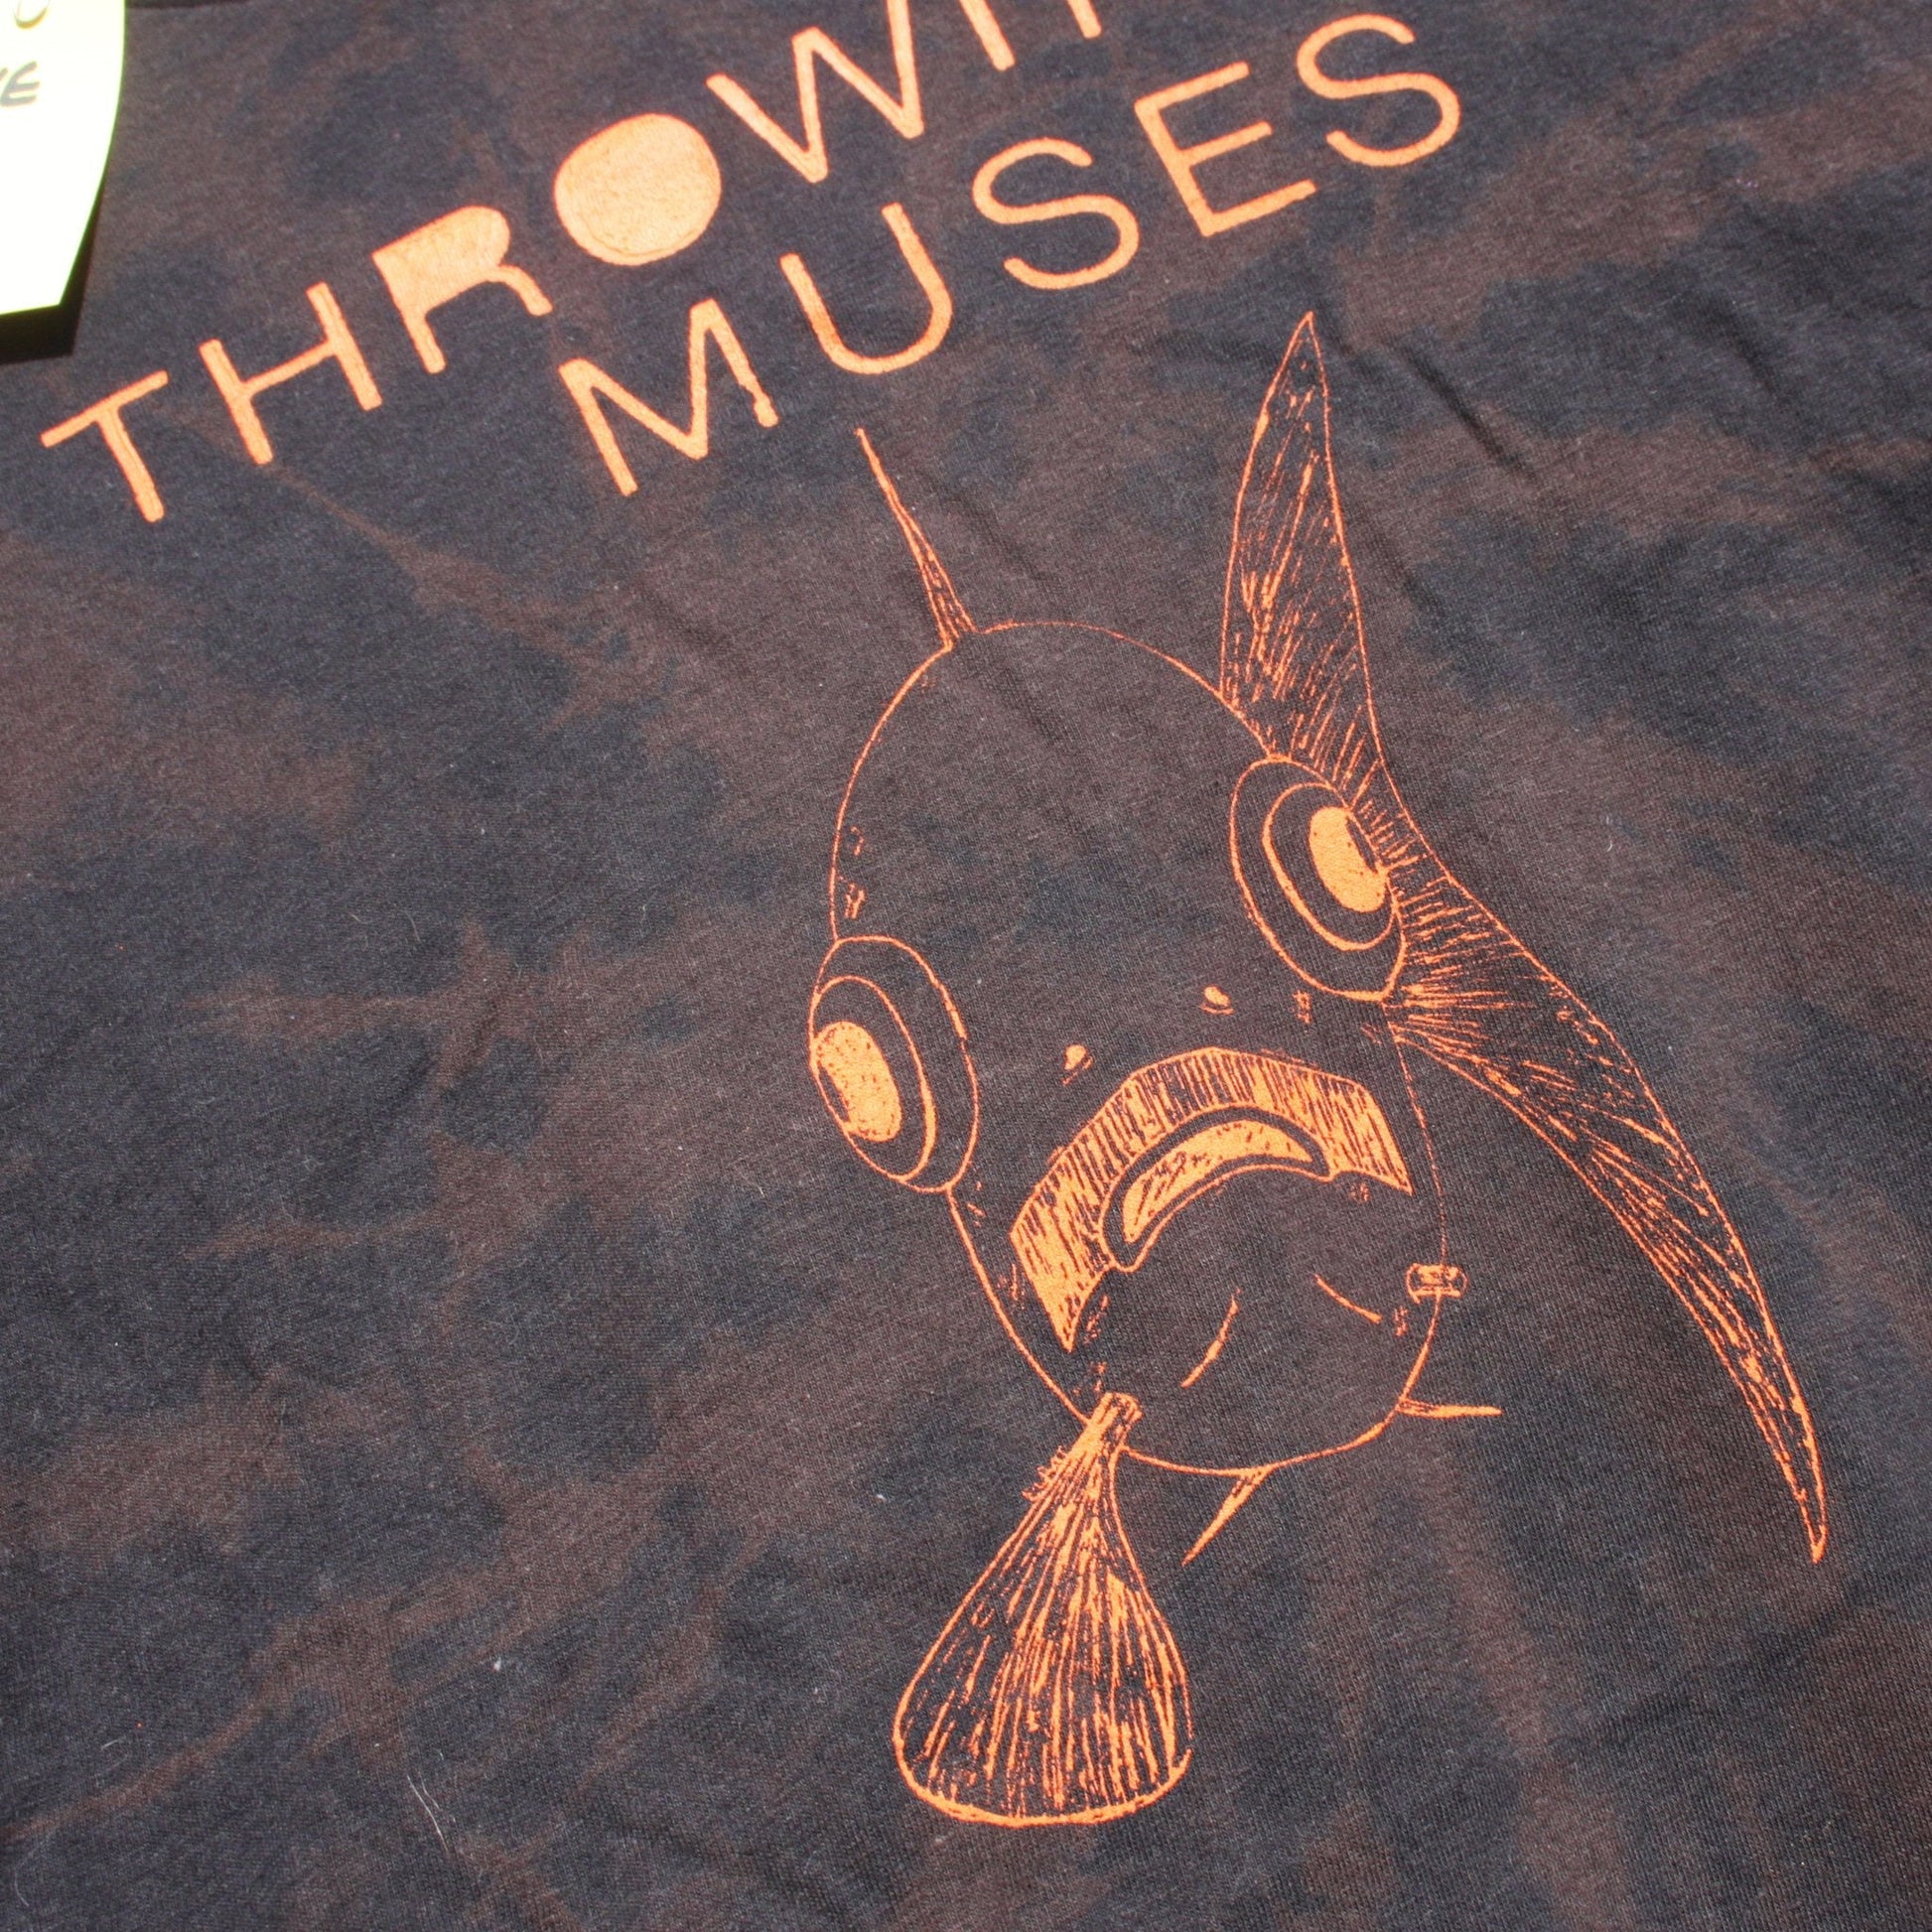 Throwing Muses 'Bywater' fish tee - Large ONE OFF Reverse Tie-Dye (#2) ***MISPRINT*** - ElRatDesigns - T Shirt